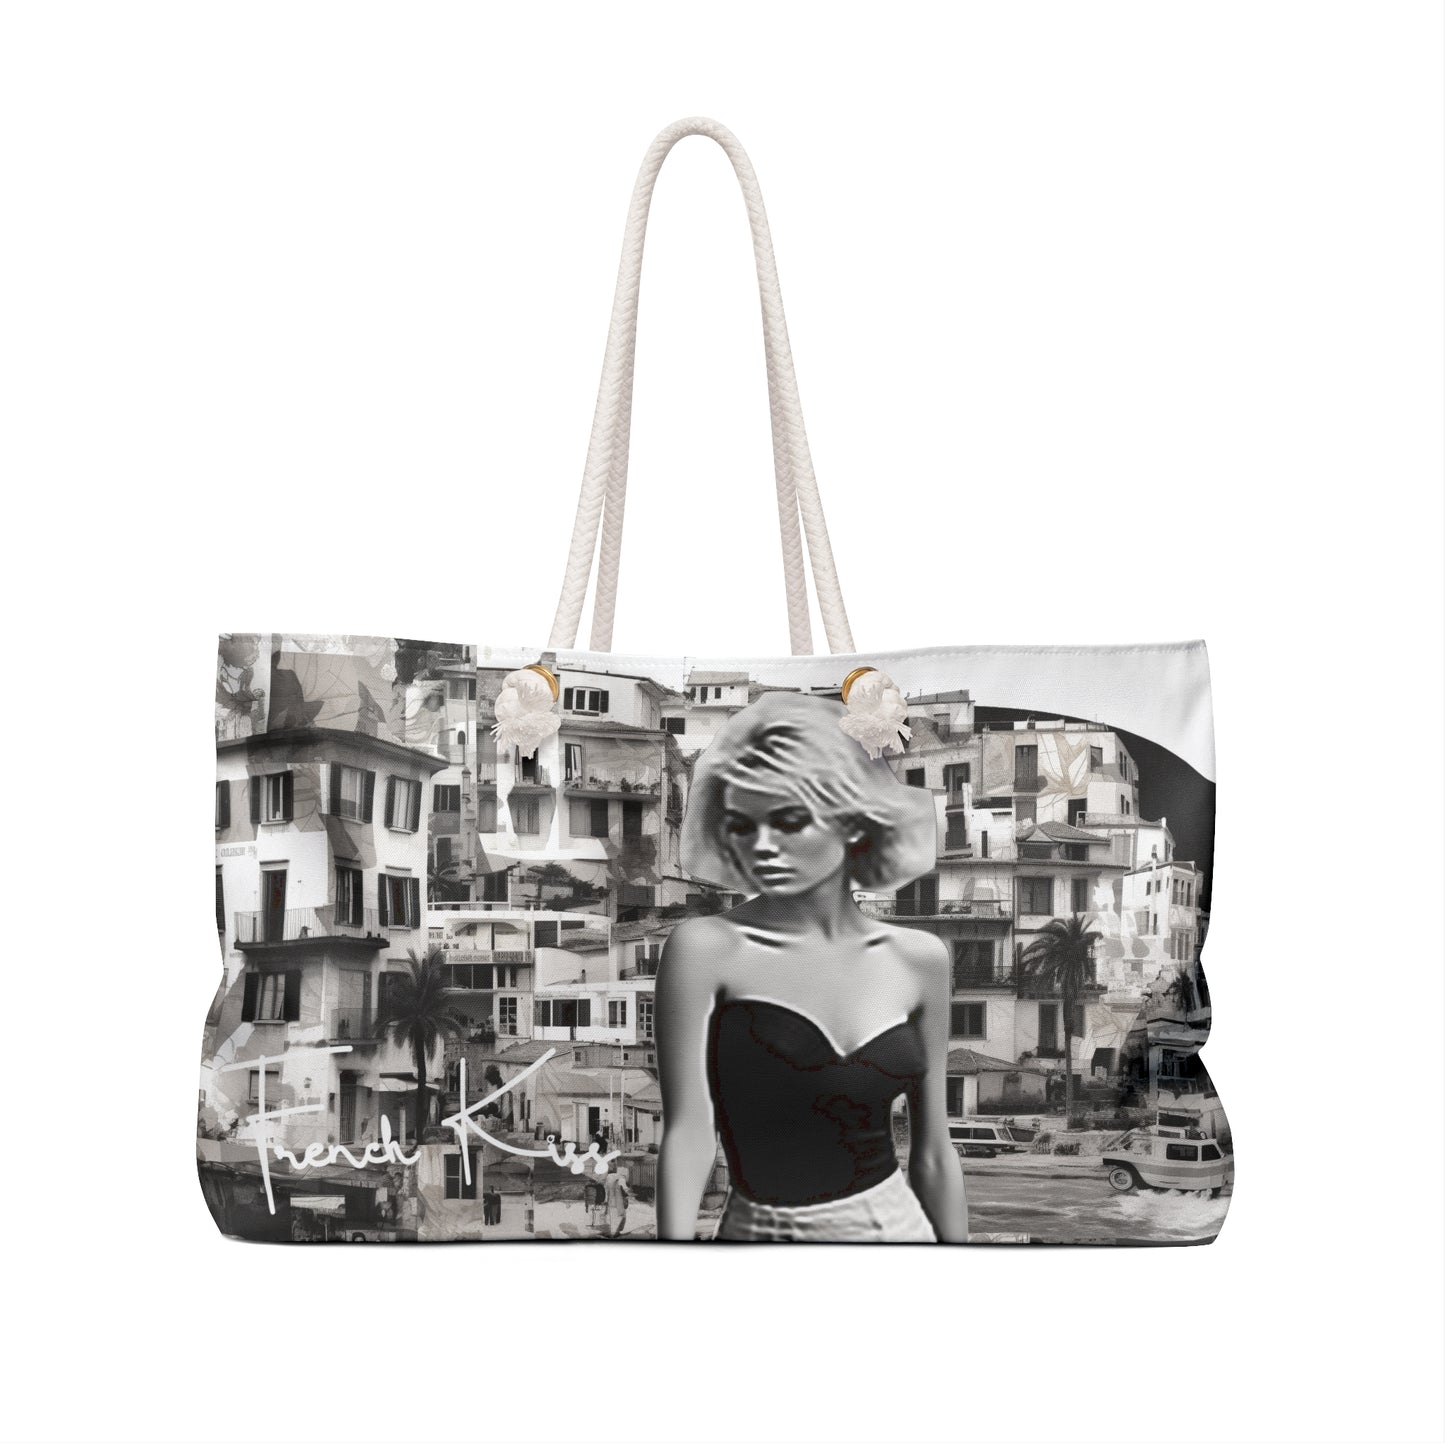 CHALEUR D'ETE Sassy Sexy Chic Weekender Accessory Bag French Kiss Pop Art, Classy, Couture, Travel, Fashion, Beauty gift item